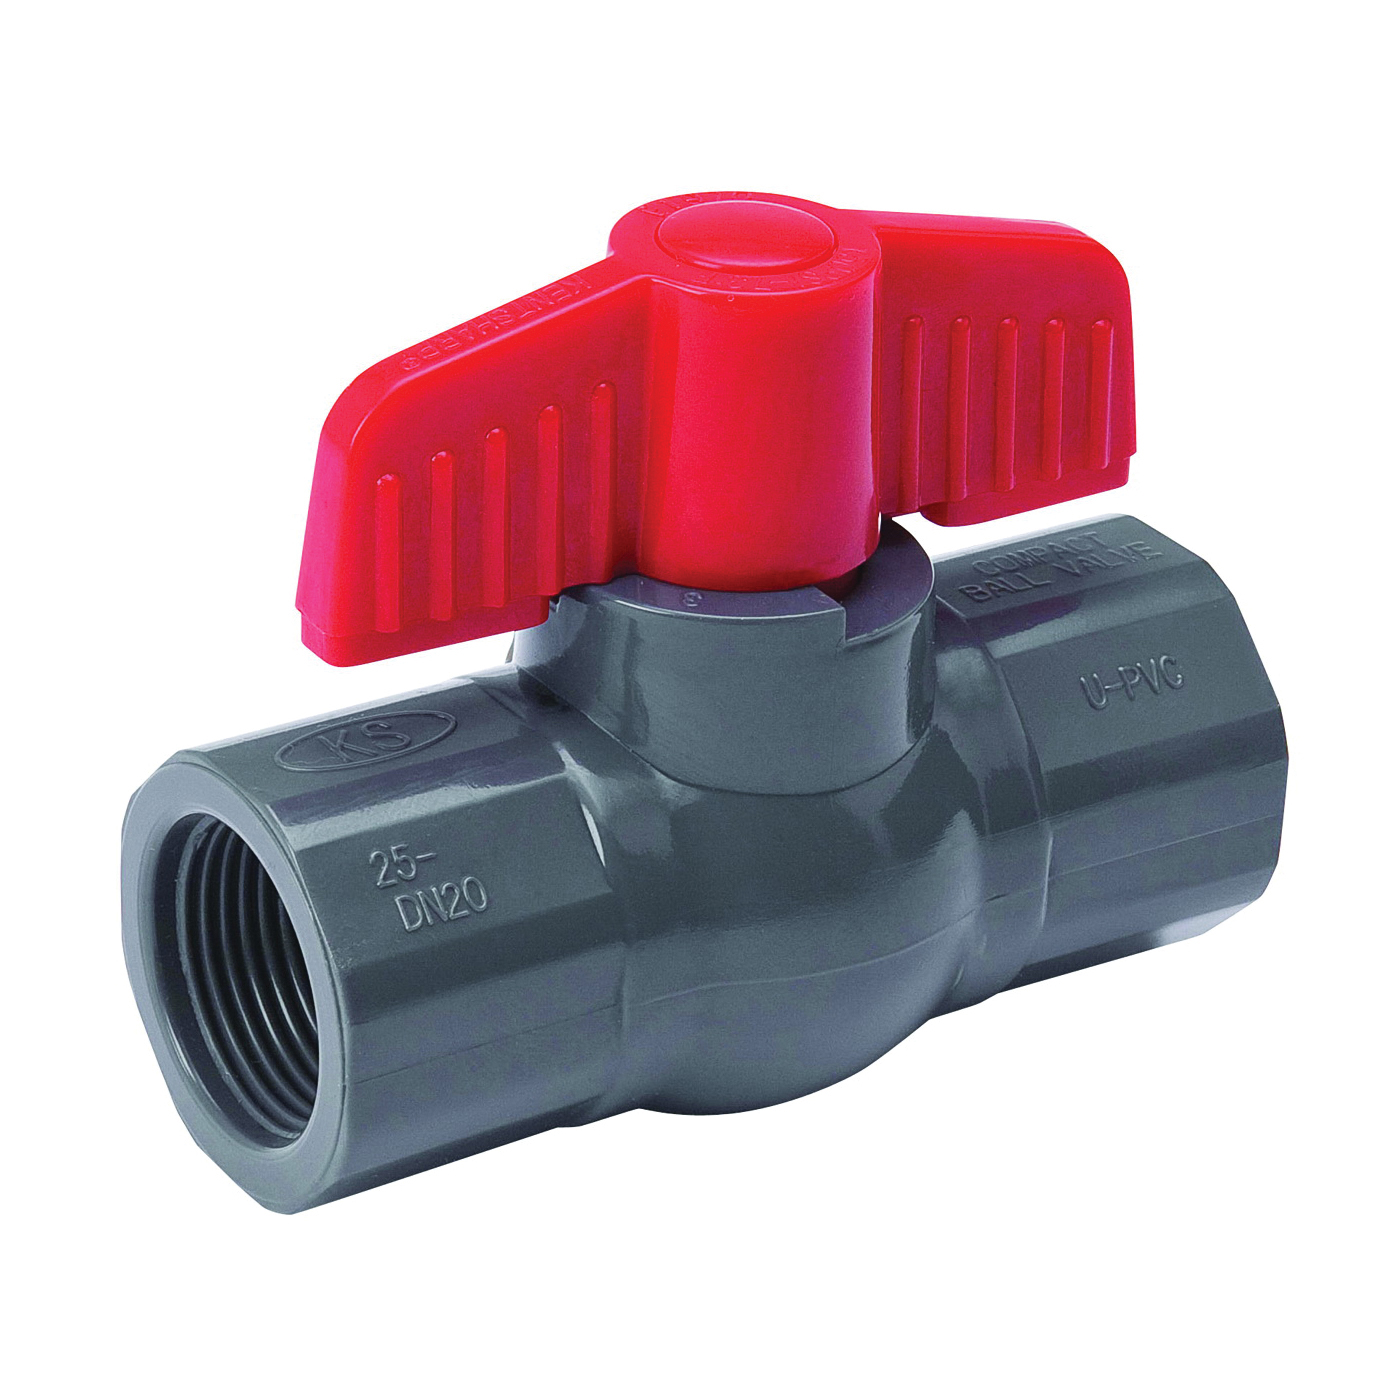 107-107 Ball Valve, 1-1/2 in Connection, FPT x FPT, 150 psi Pressure, PVC Body